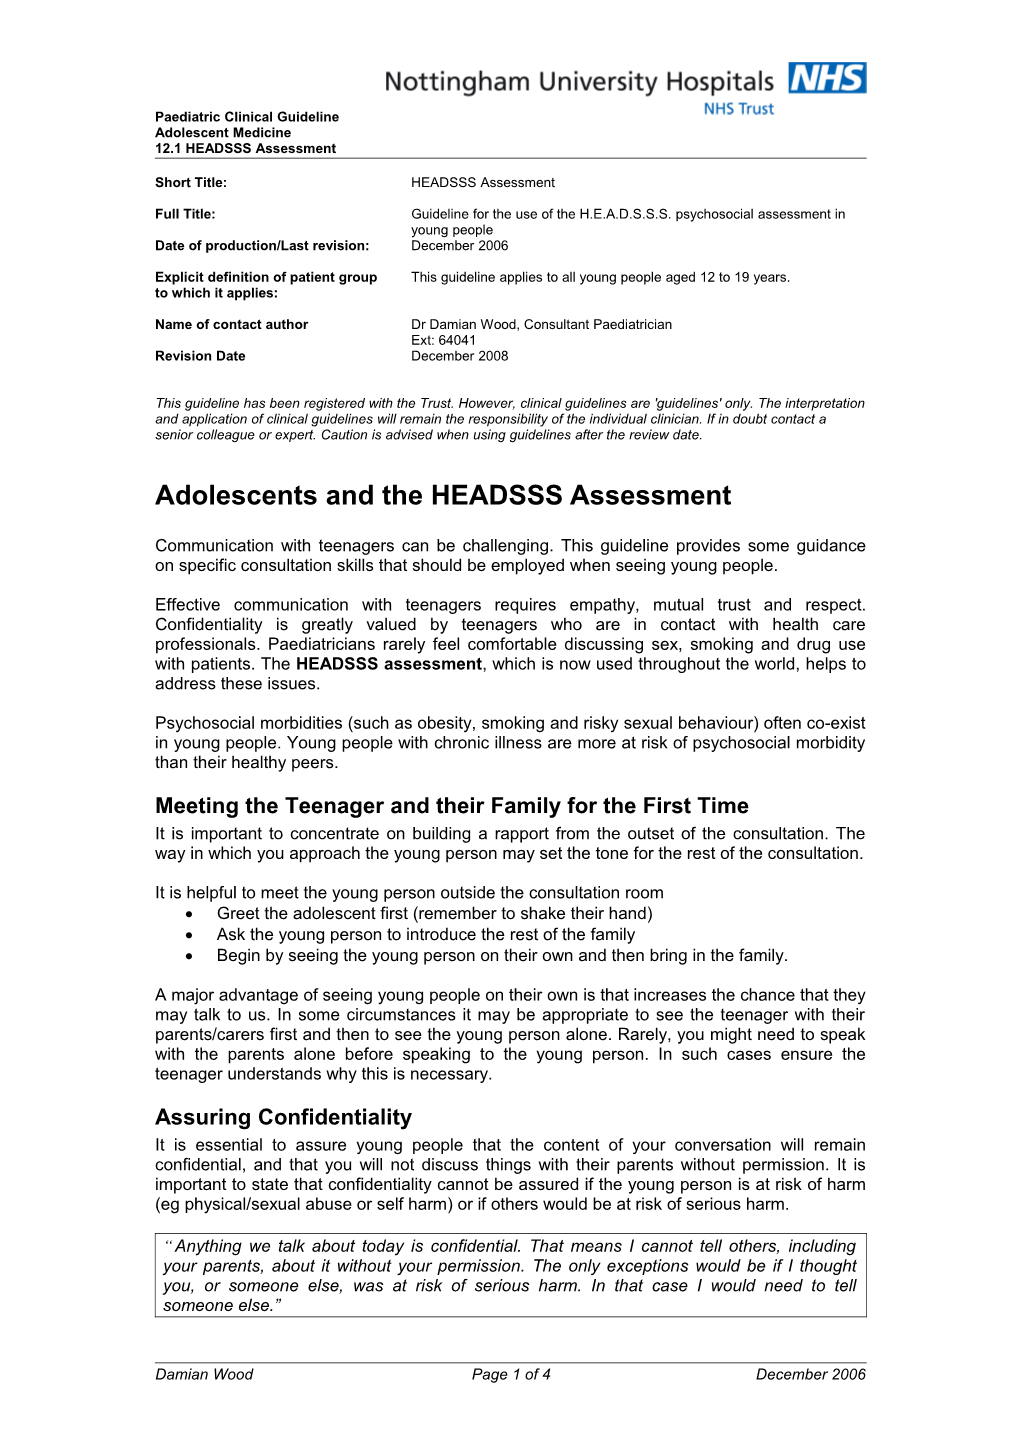 Adolescents and the HEADSSS Assessment